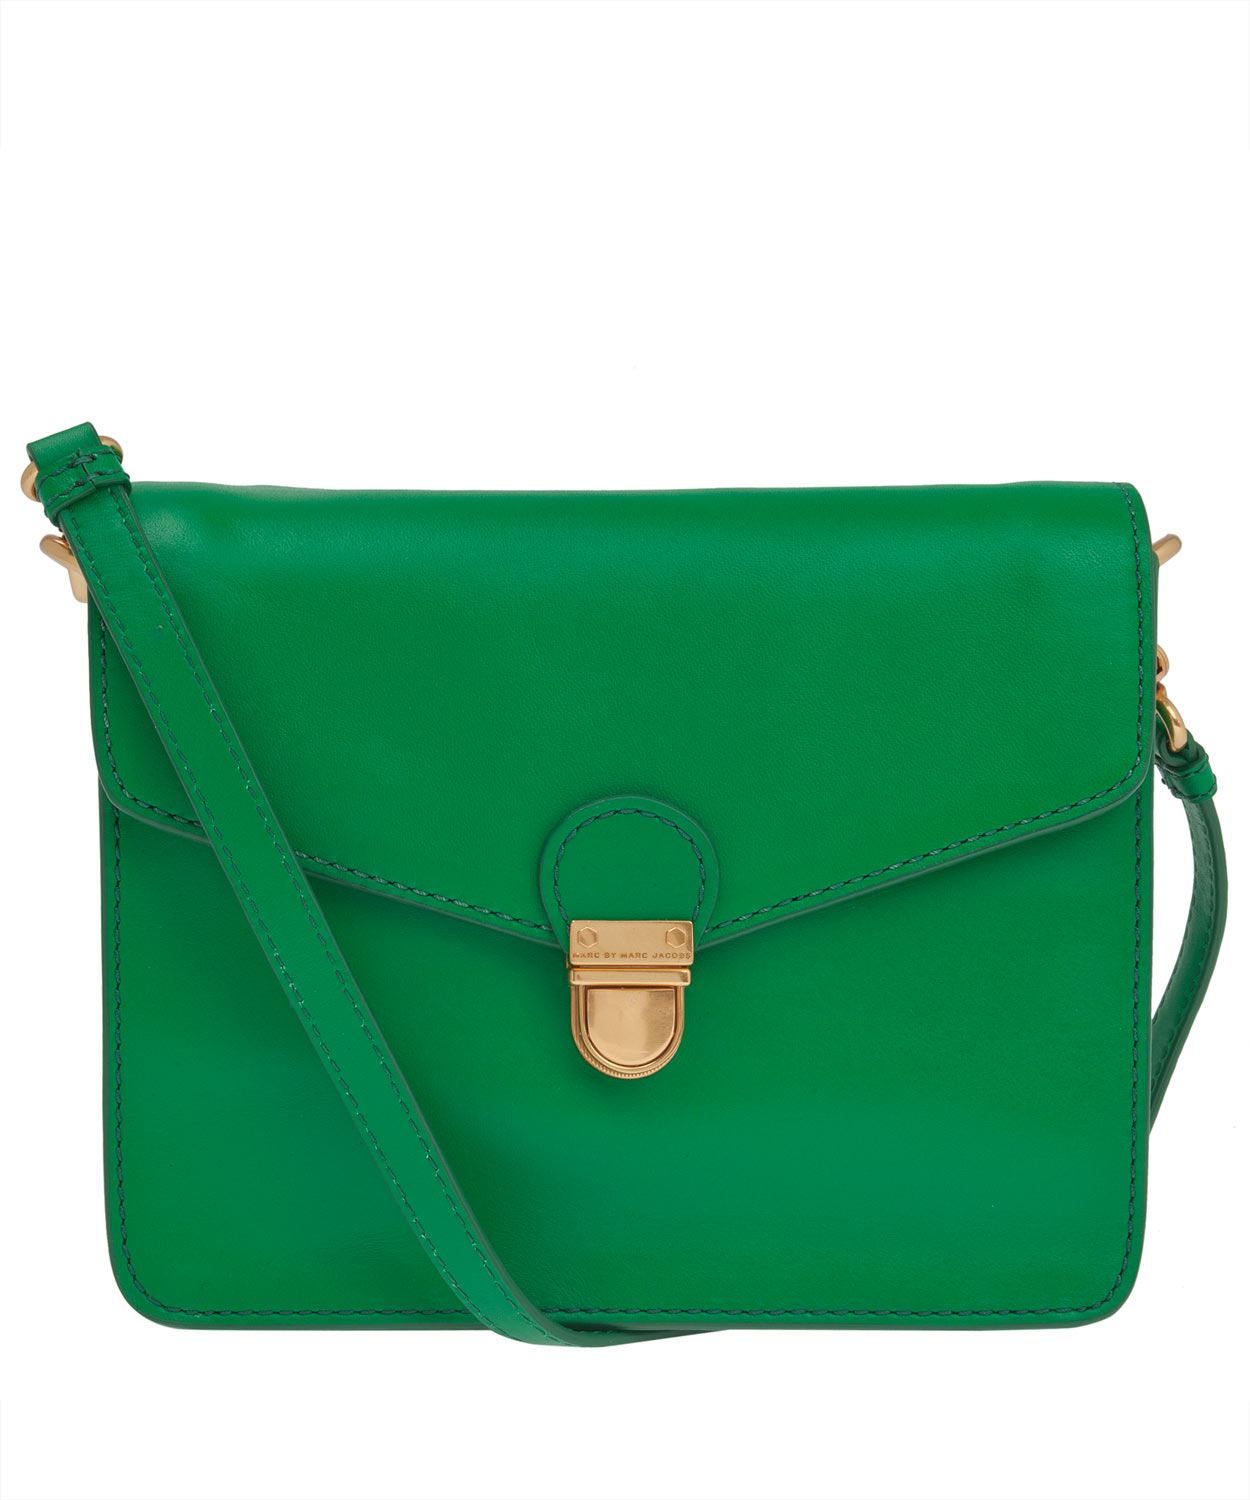 Lyst - Marc By Marc Jacobs Green Cricket Leather Crossbody Bag in Green